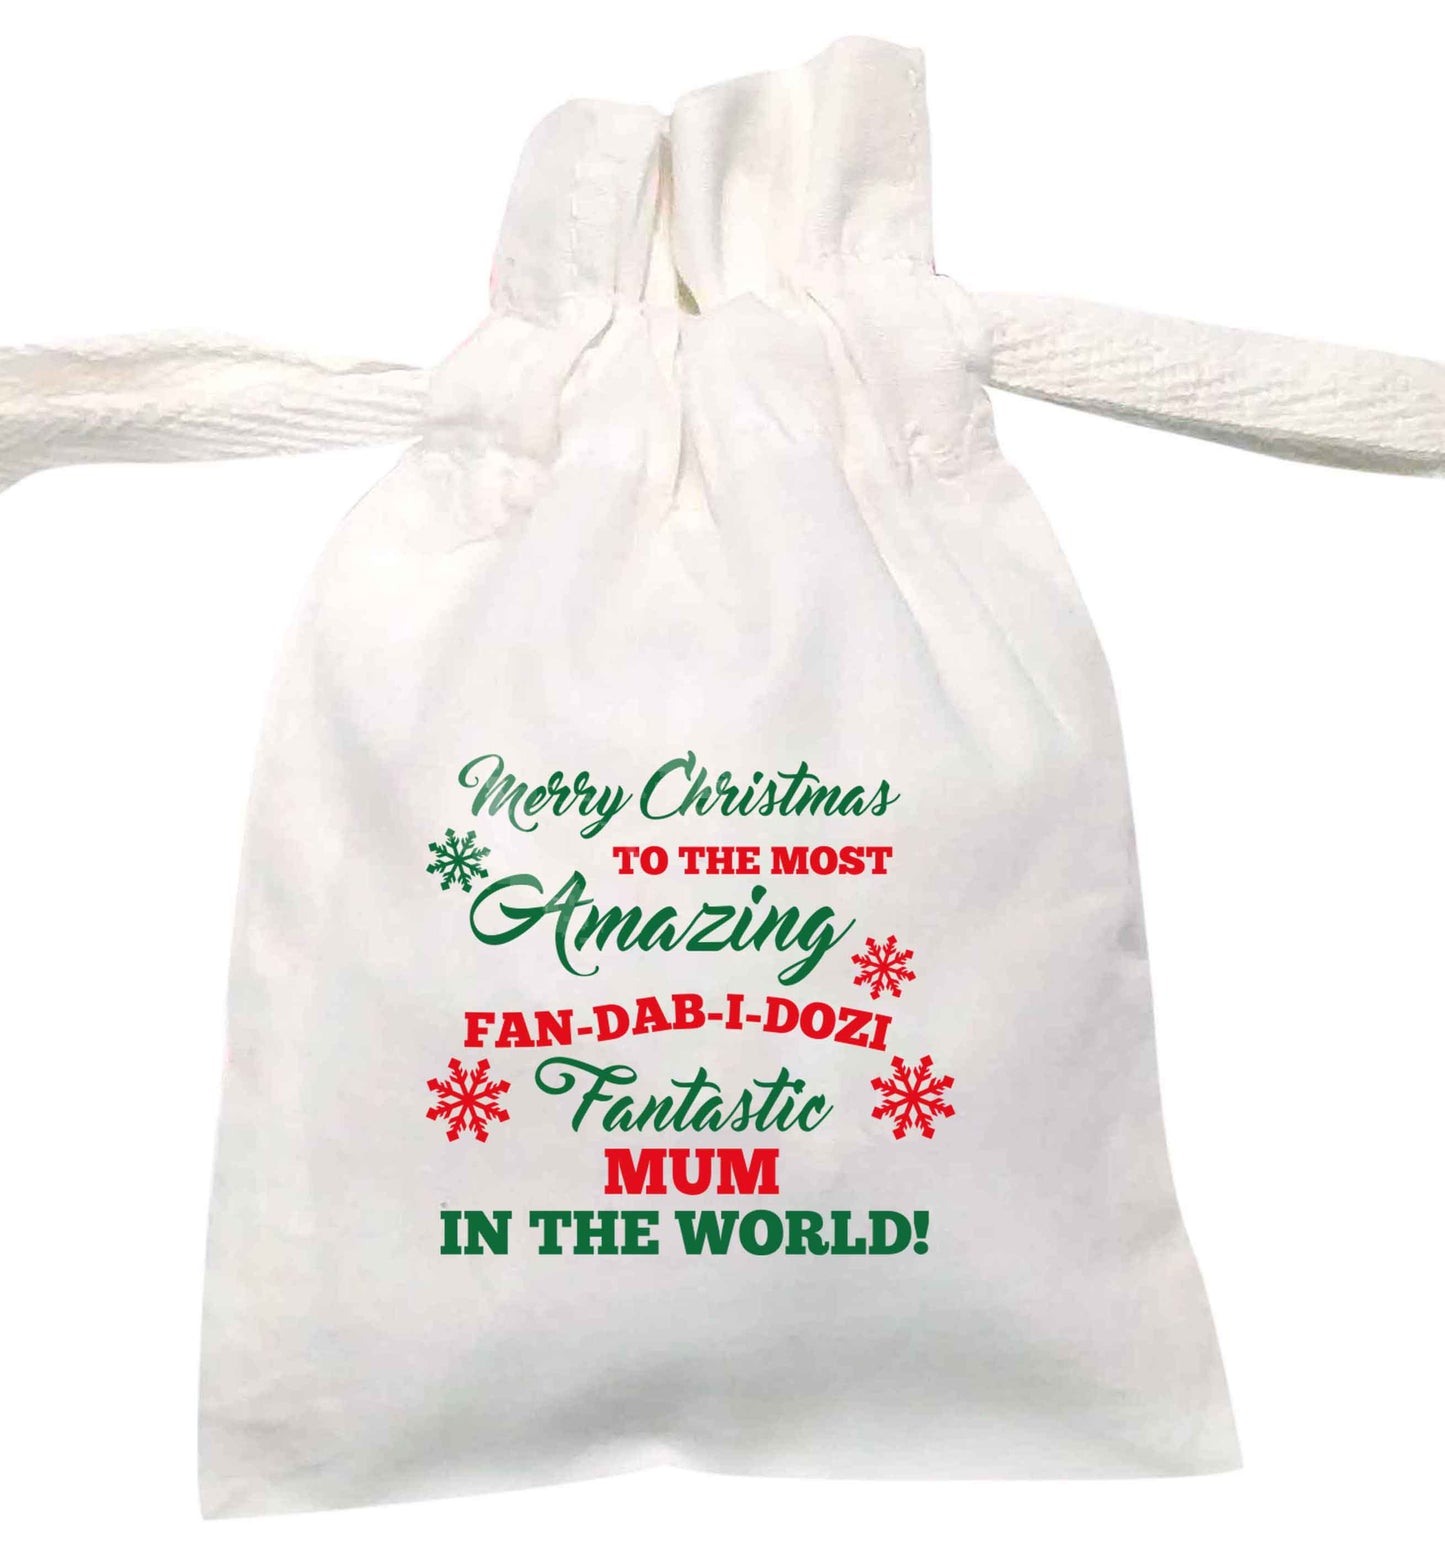 Merry Christmas to the most amazing fan-dab-i-dozi fantasic mum in the world | XS - L | Pouch / Drawstring bag / Sack | Organic Cotton | Bulk discounts available!